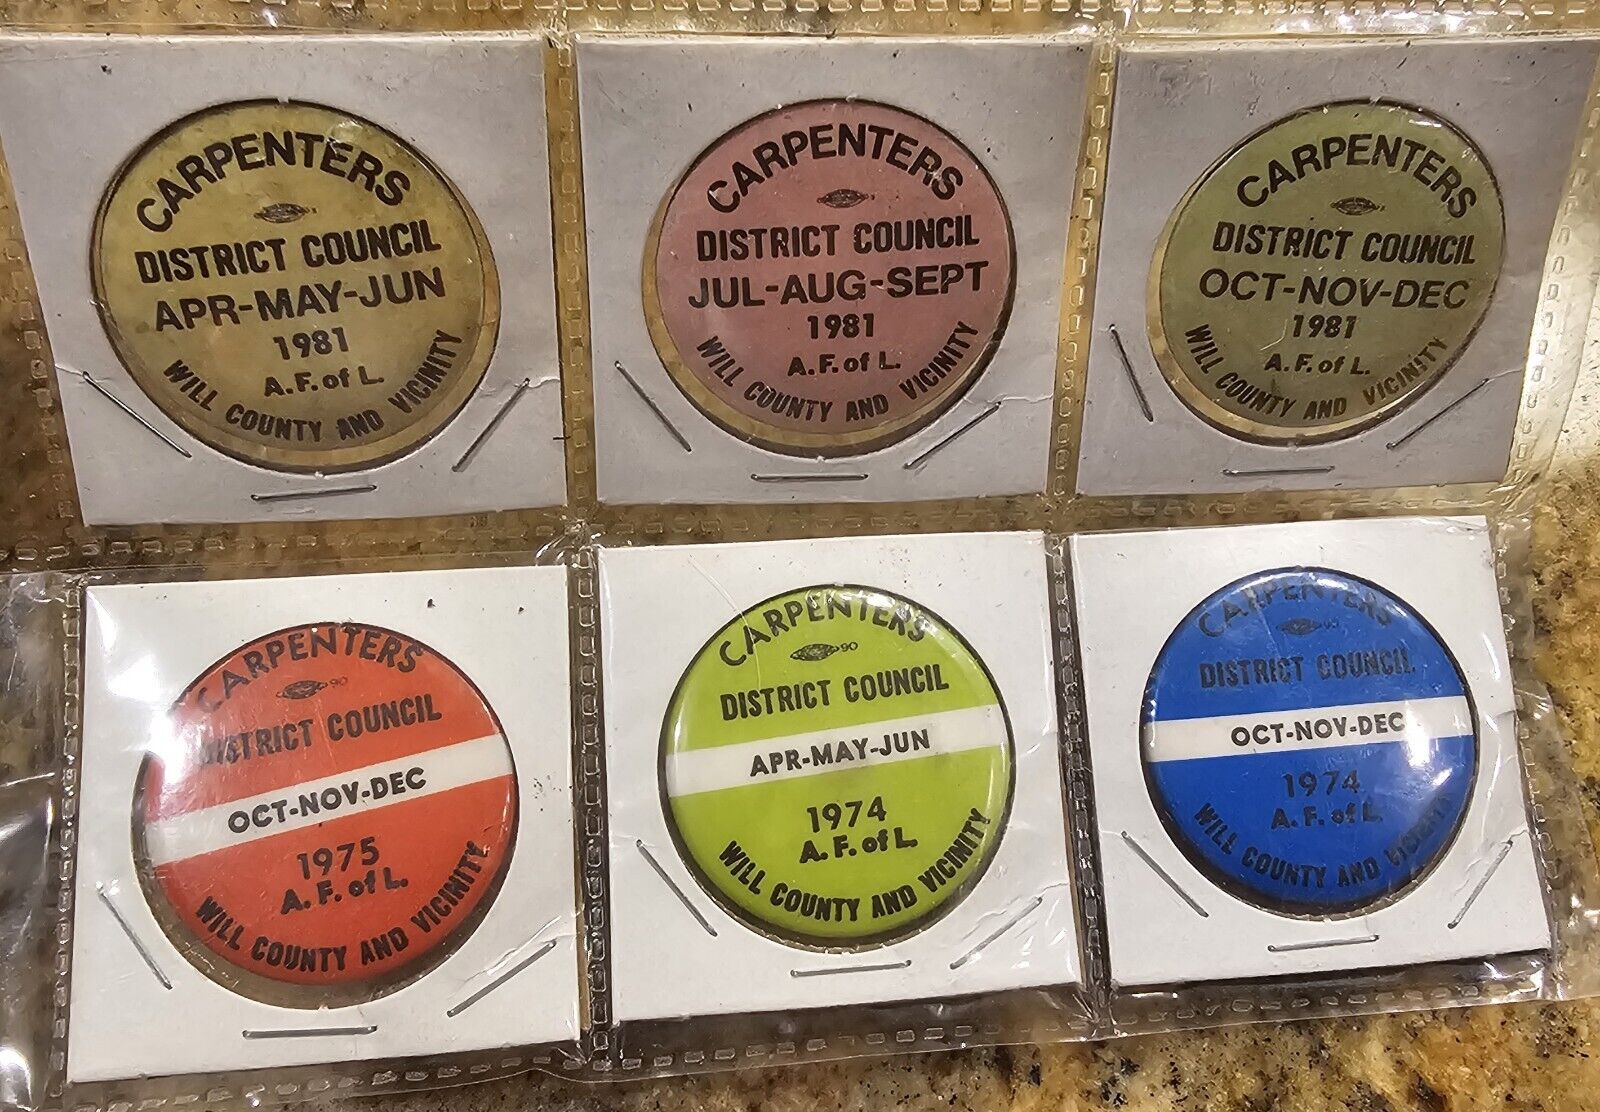 Lot of 6 Vintage Carpenters District Council Union Pins, Will County illinois